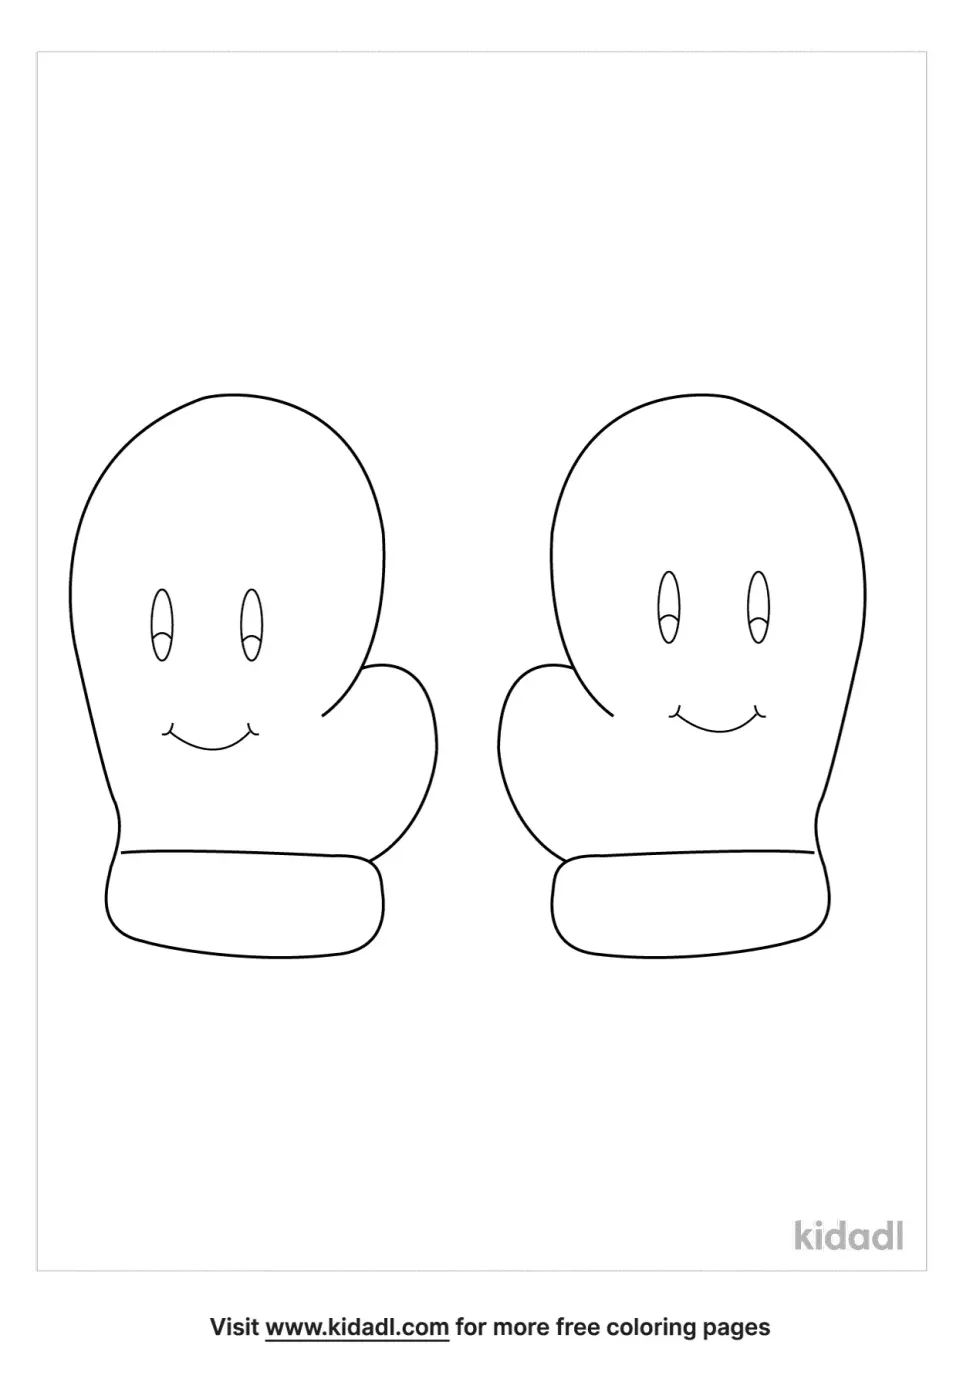 Cute Mitten Coloring Page